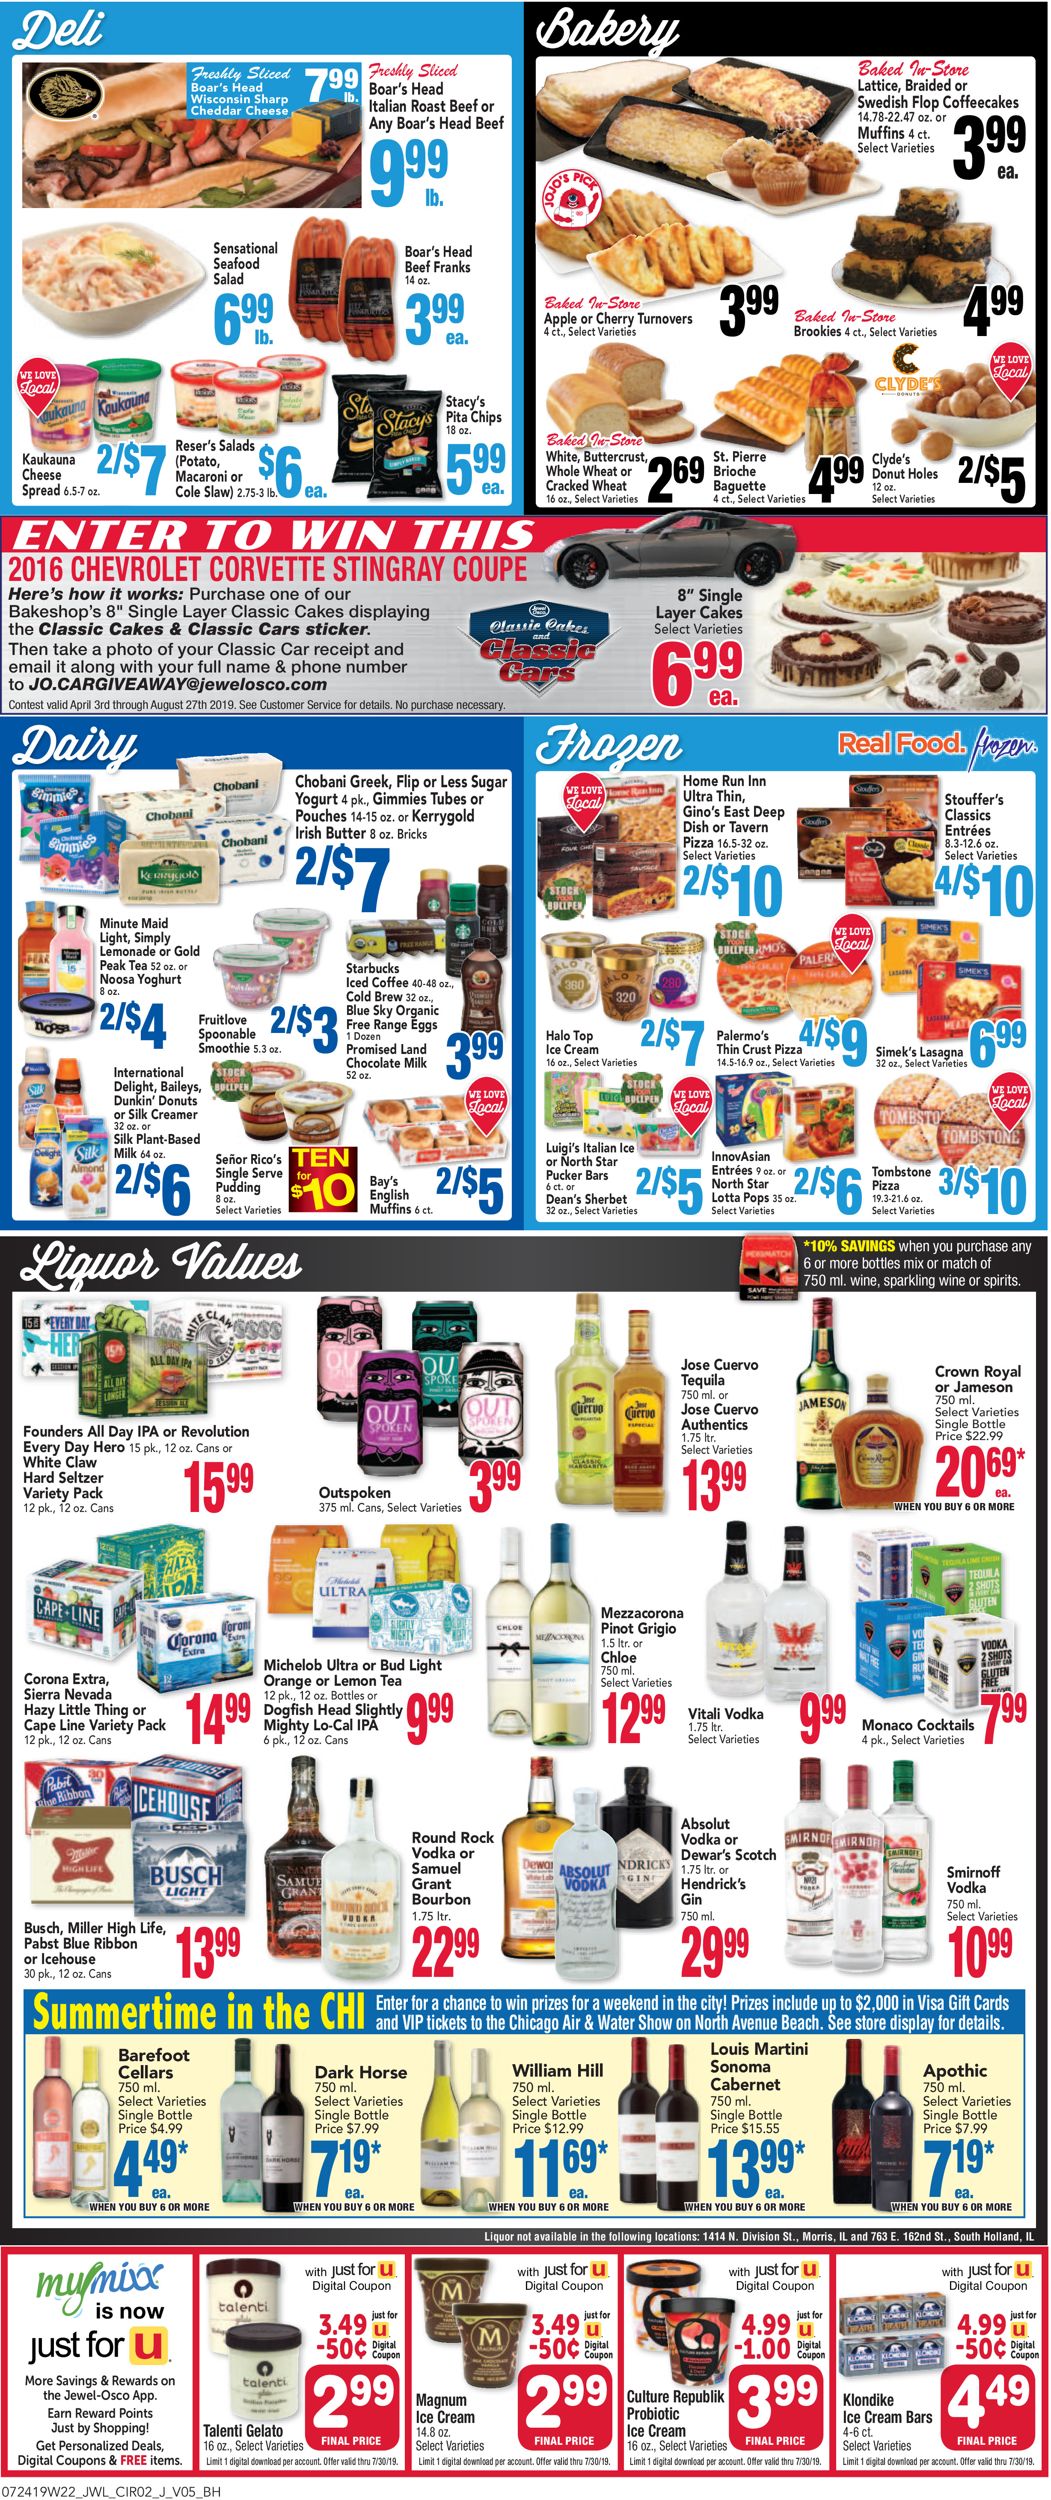 Jewel Osco Current weekly ad 07/24 - 07/30/2019 [2] - frequent-ads.com